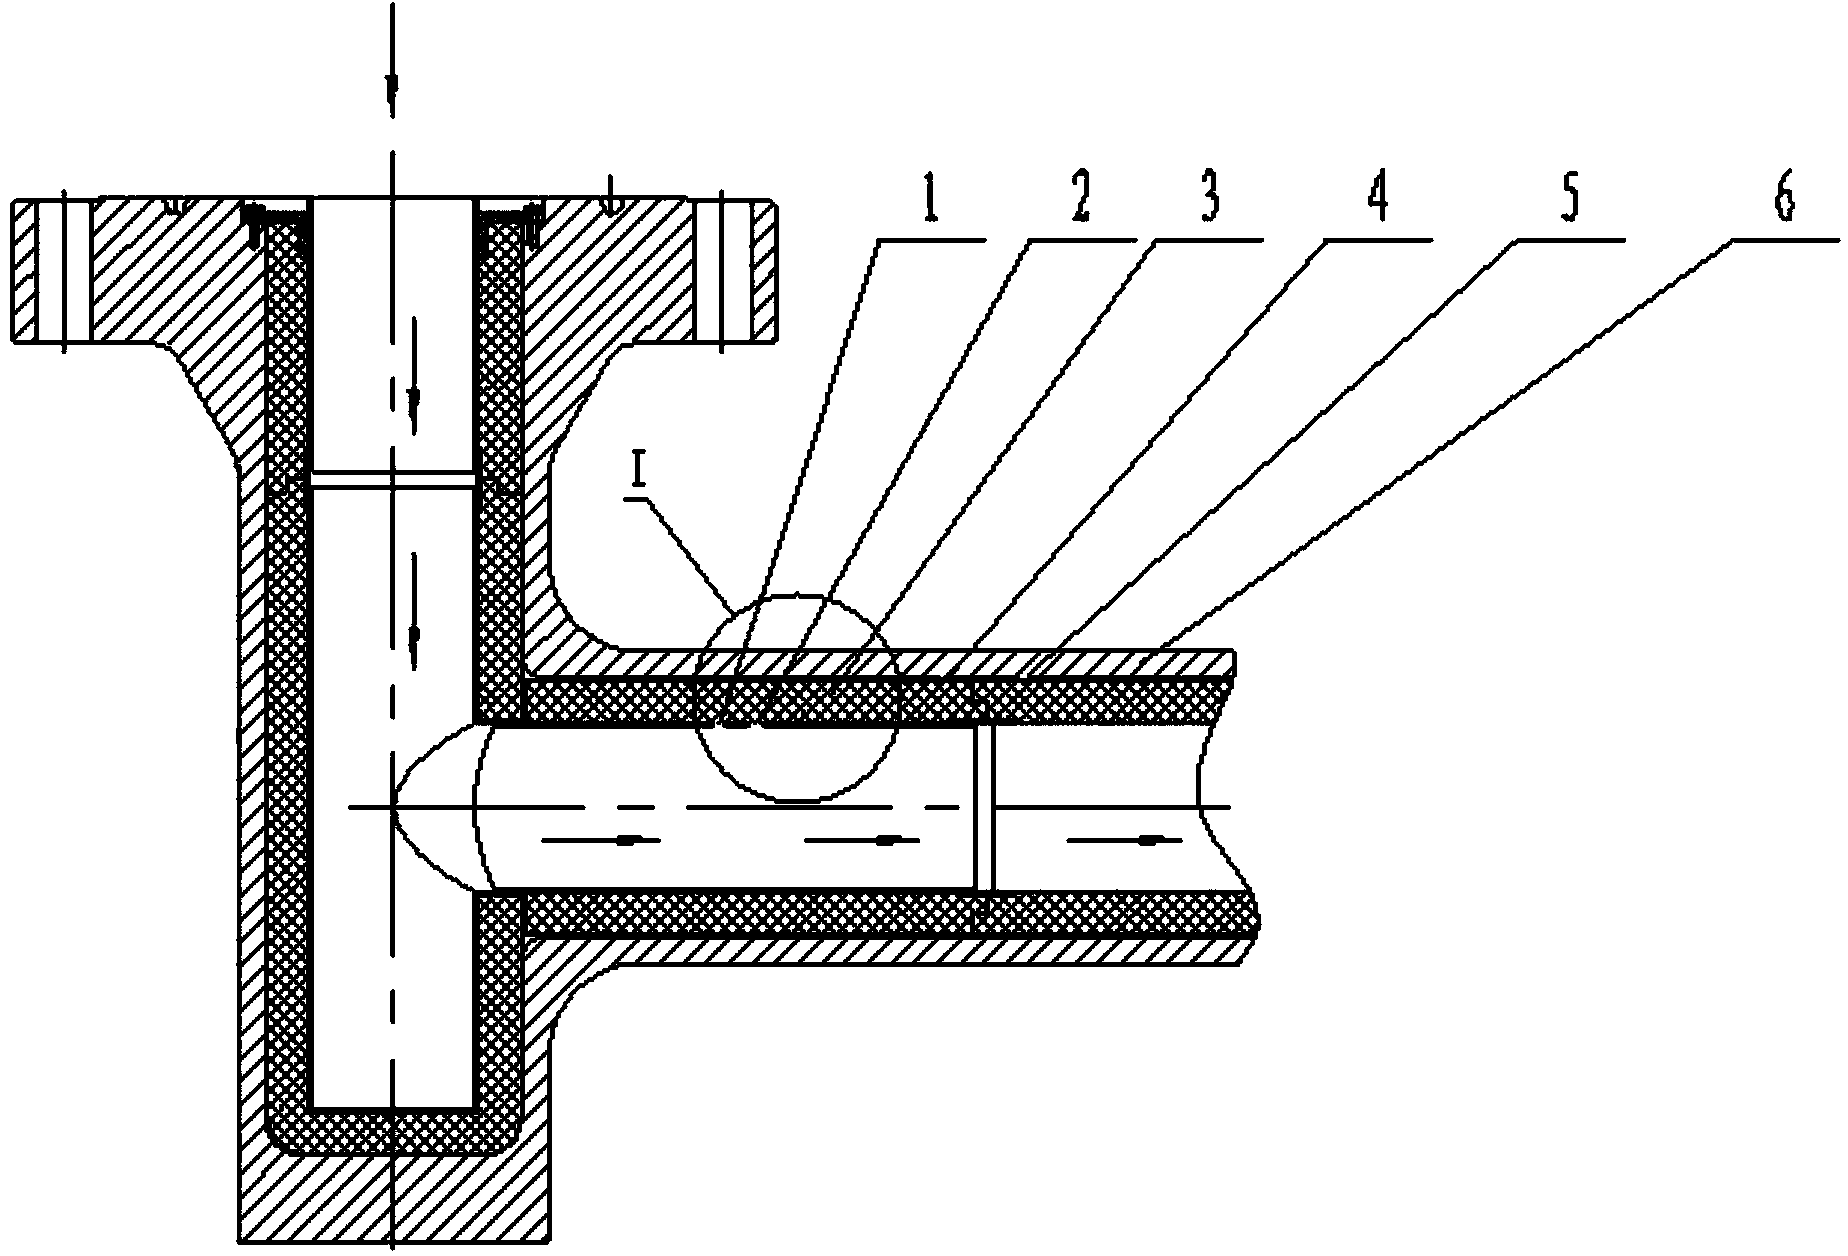 Structure capable of reducing heat loss of high-temperature pipeline